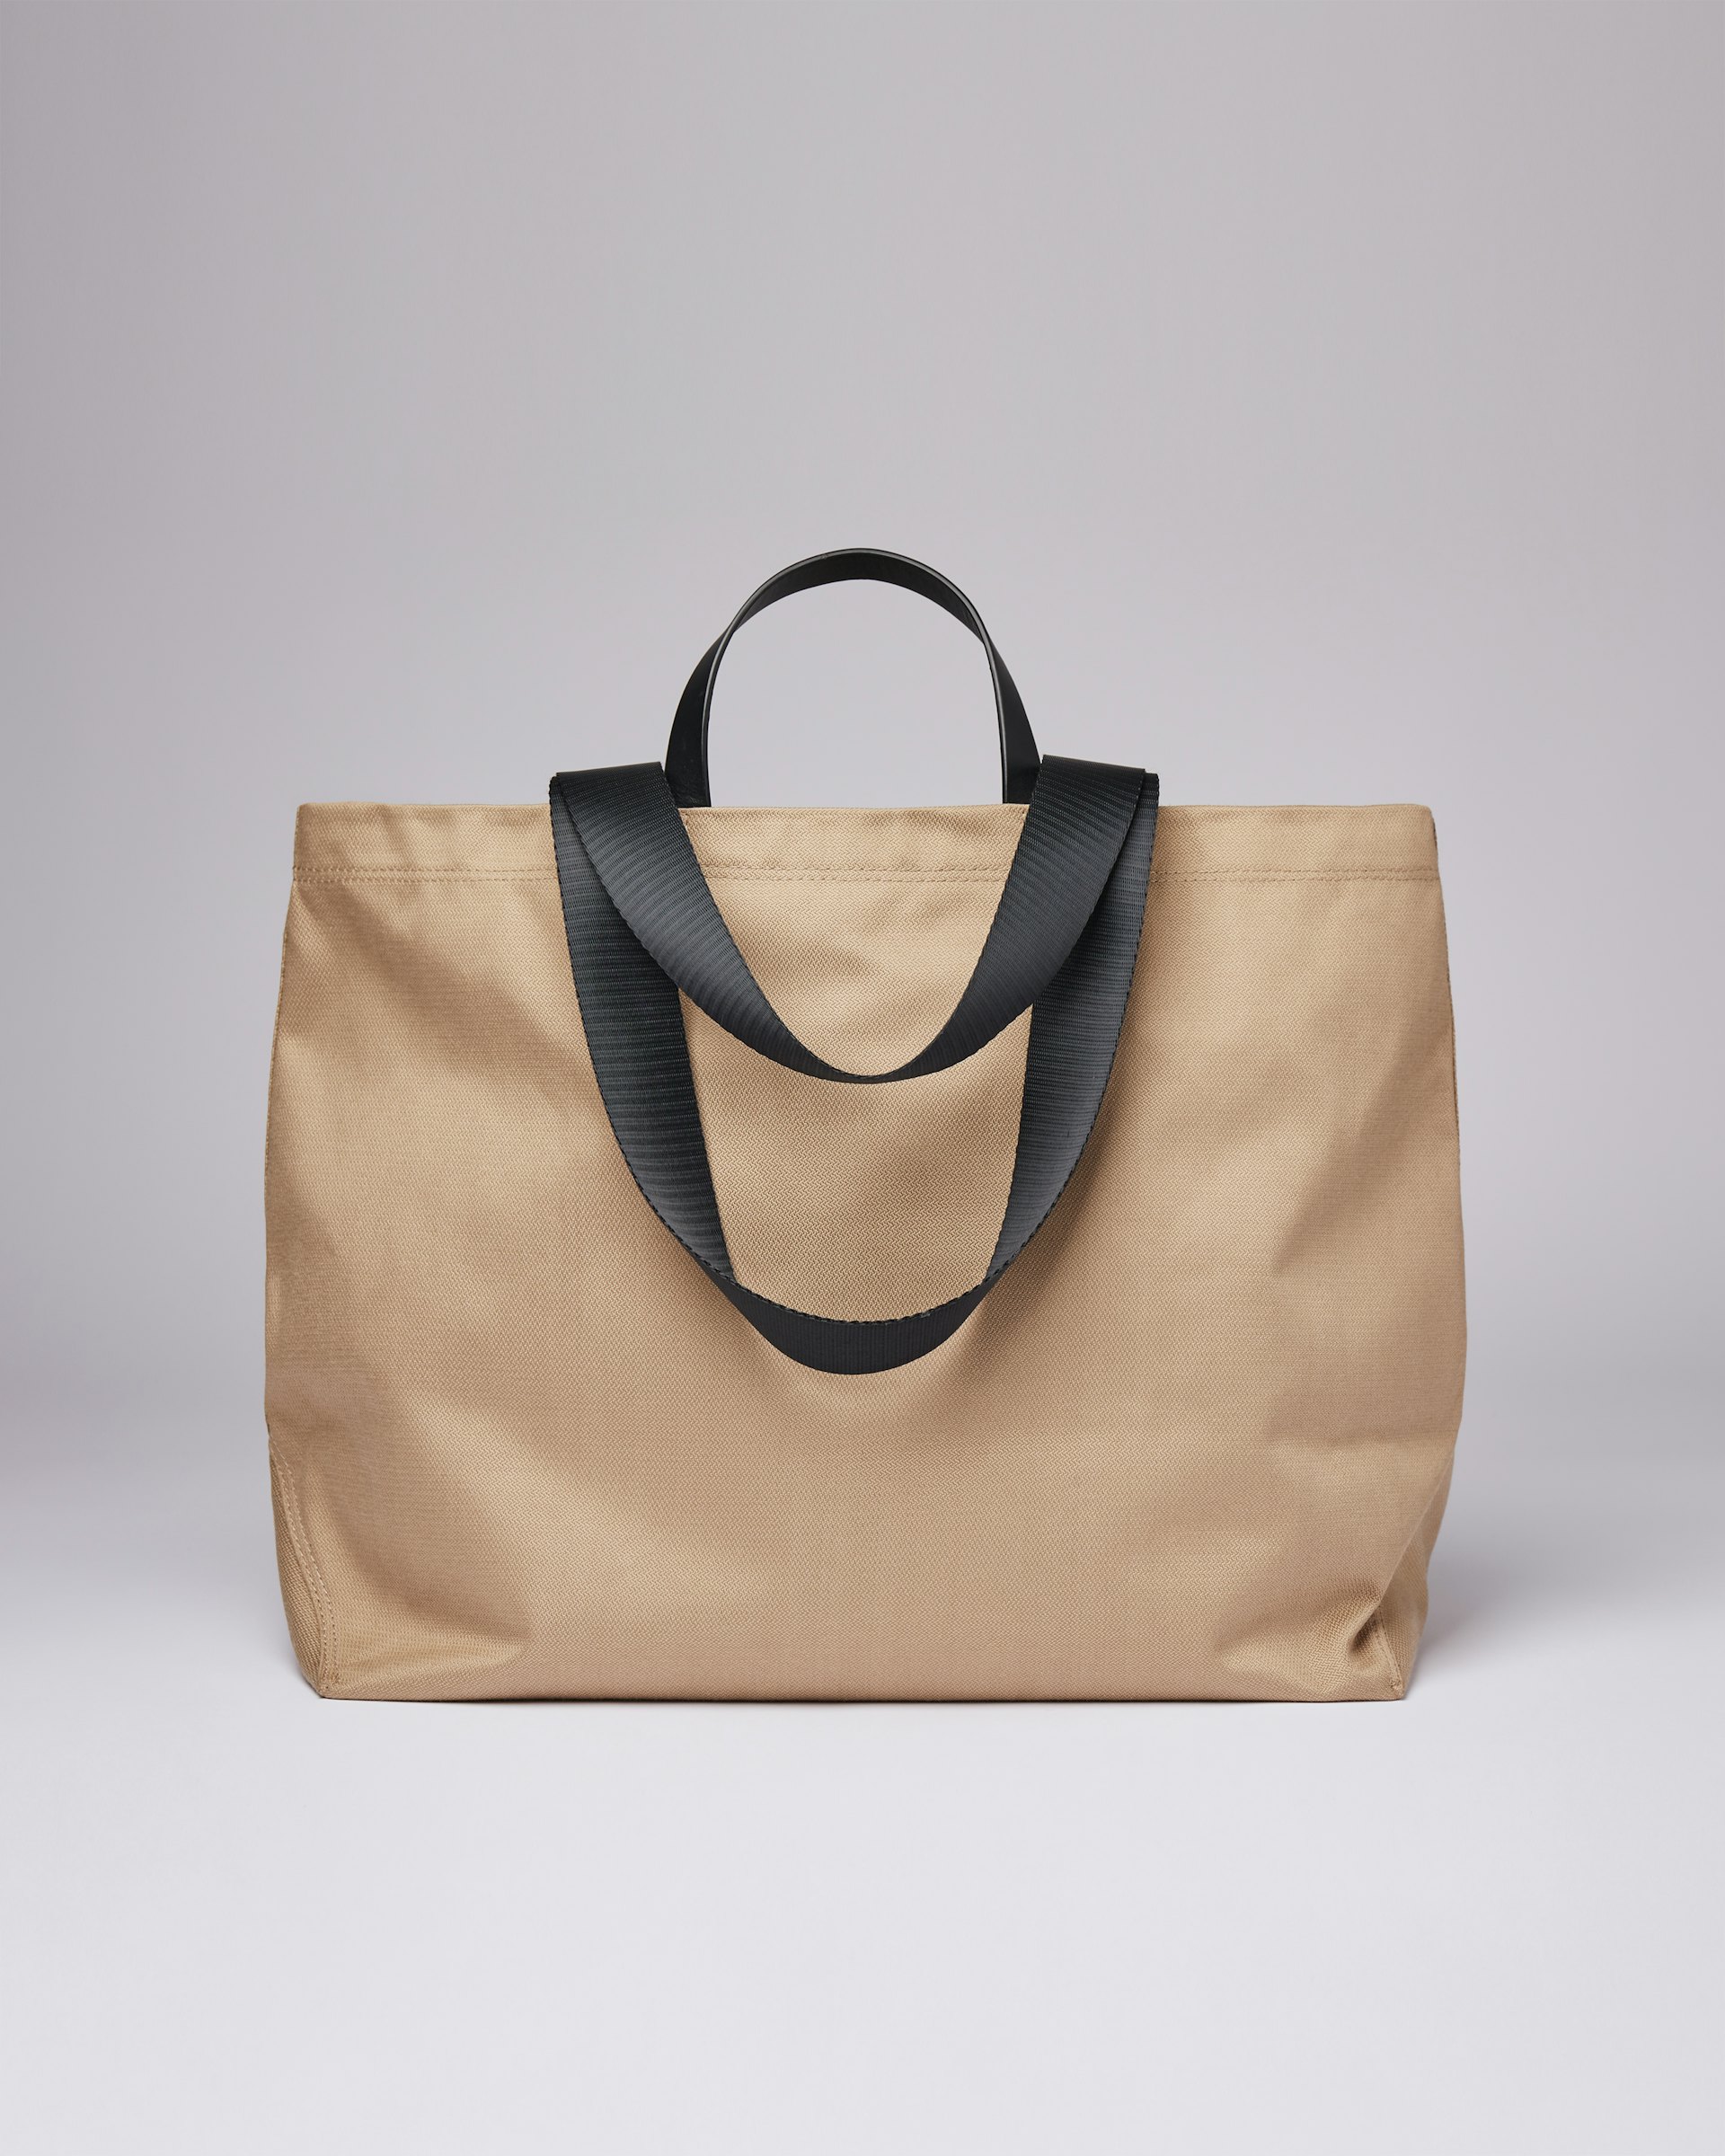 Agnes belongs to the category Tote bags and is in color black & beige (3 of 7)